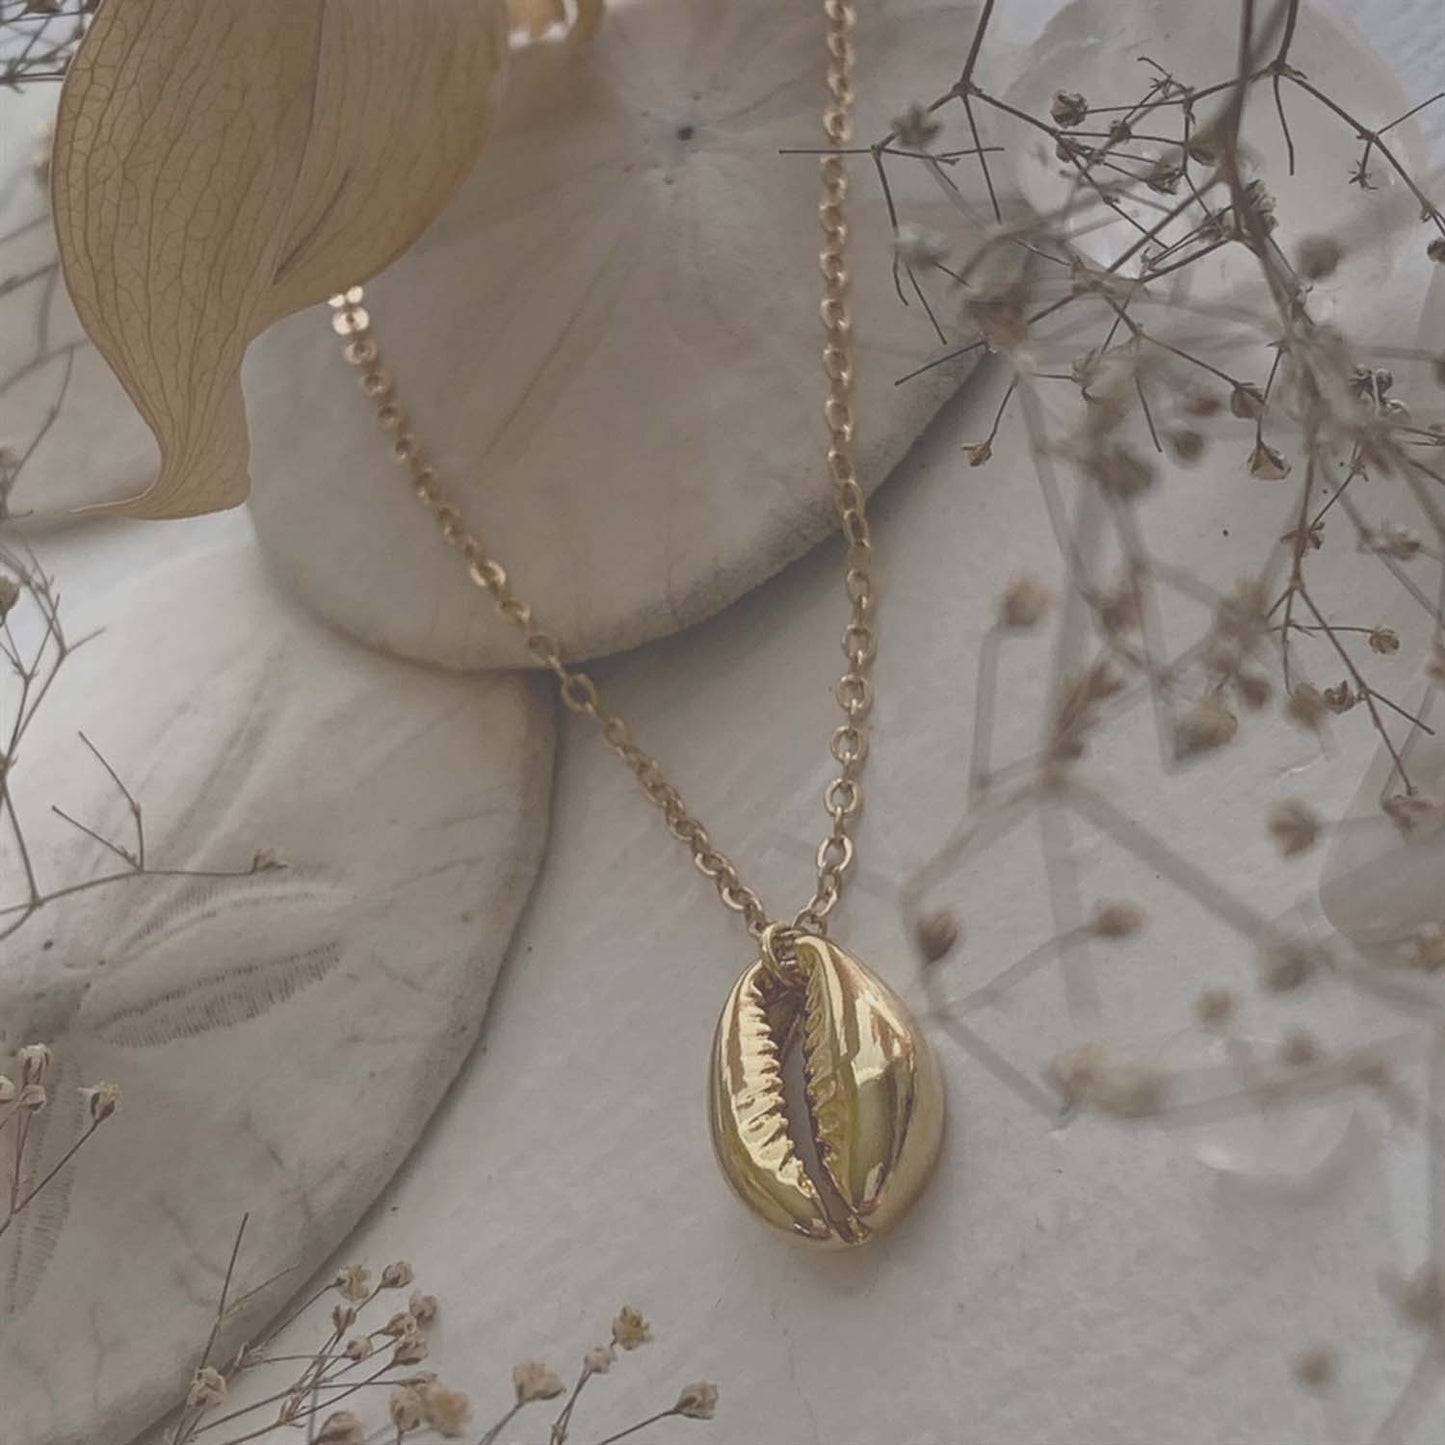 Orinoco Sea Shell Charm Necklace in Gold